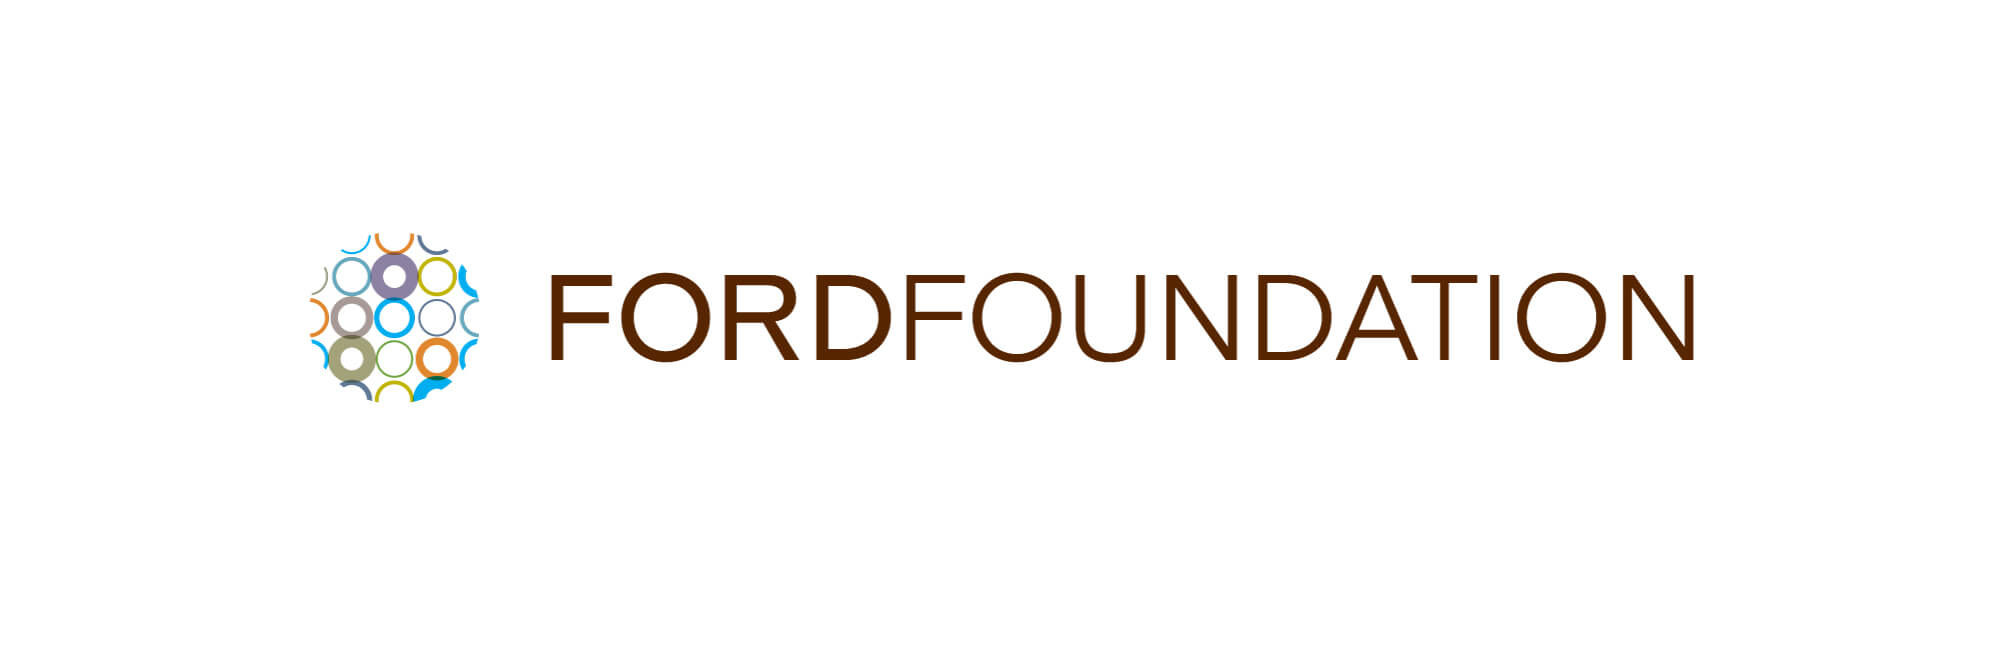 The ford foundation grants #10